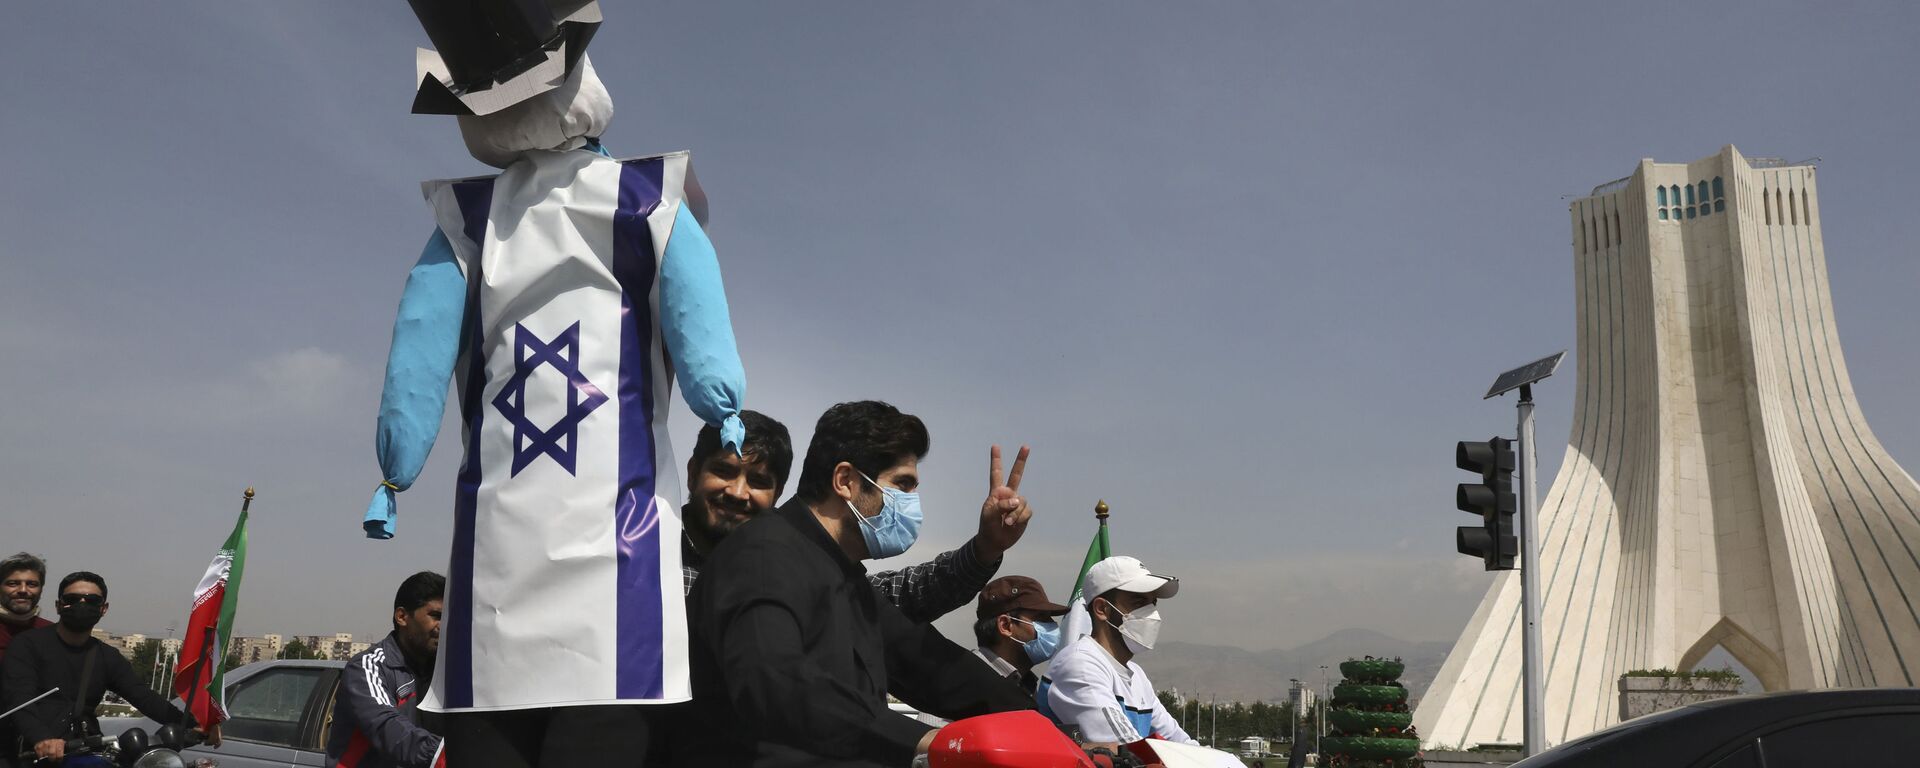 A demonstrator on a motorcycle holds an effigy representing Israel and the United States  during the annual Al-Quds, or Jerusalem, Day rally, with the Azadi (Freedom) monument tower seen at right, in Tehran, Iran, Friday, 7 May 2021. - Sputnik International, 1920, 07.05.2021